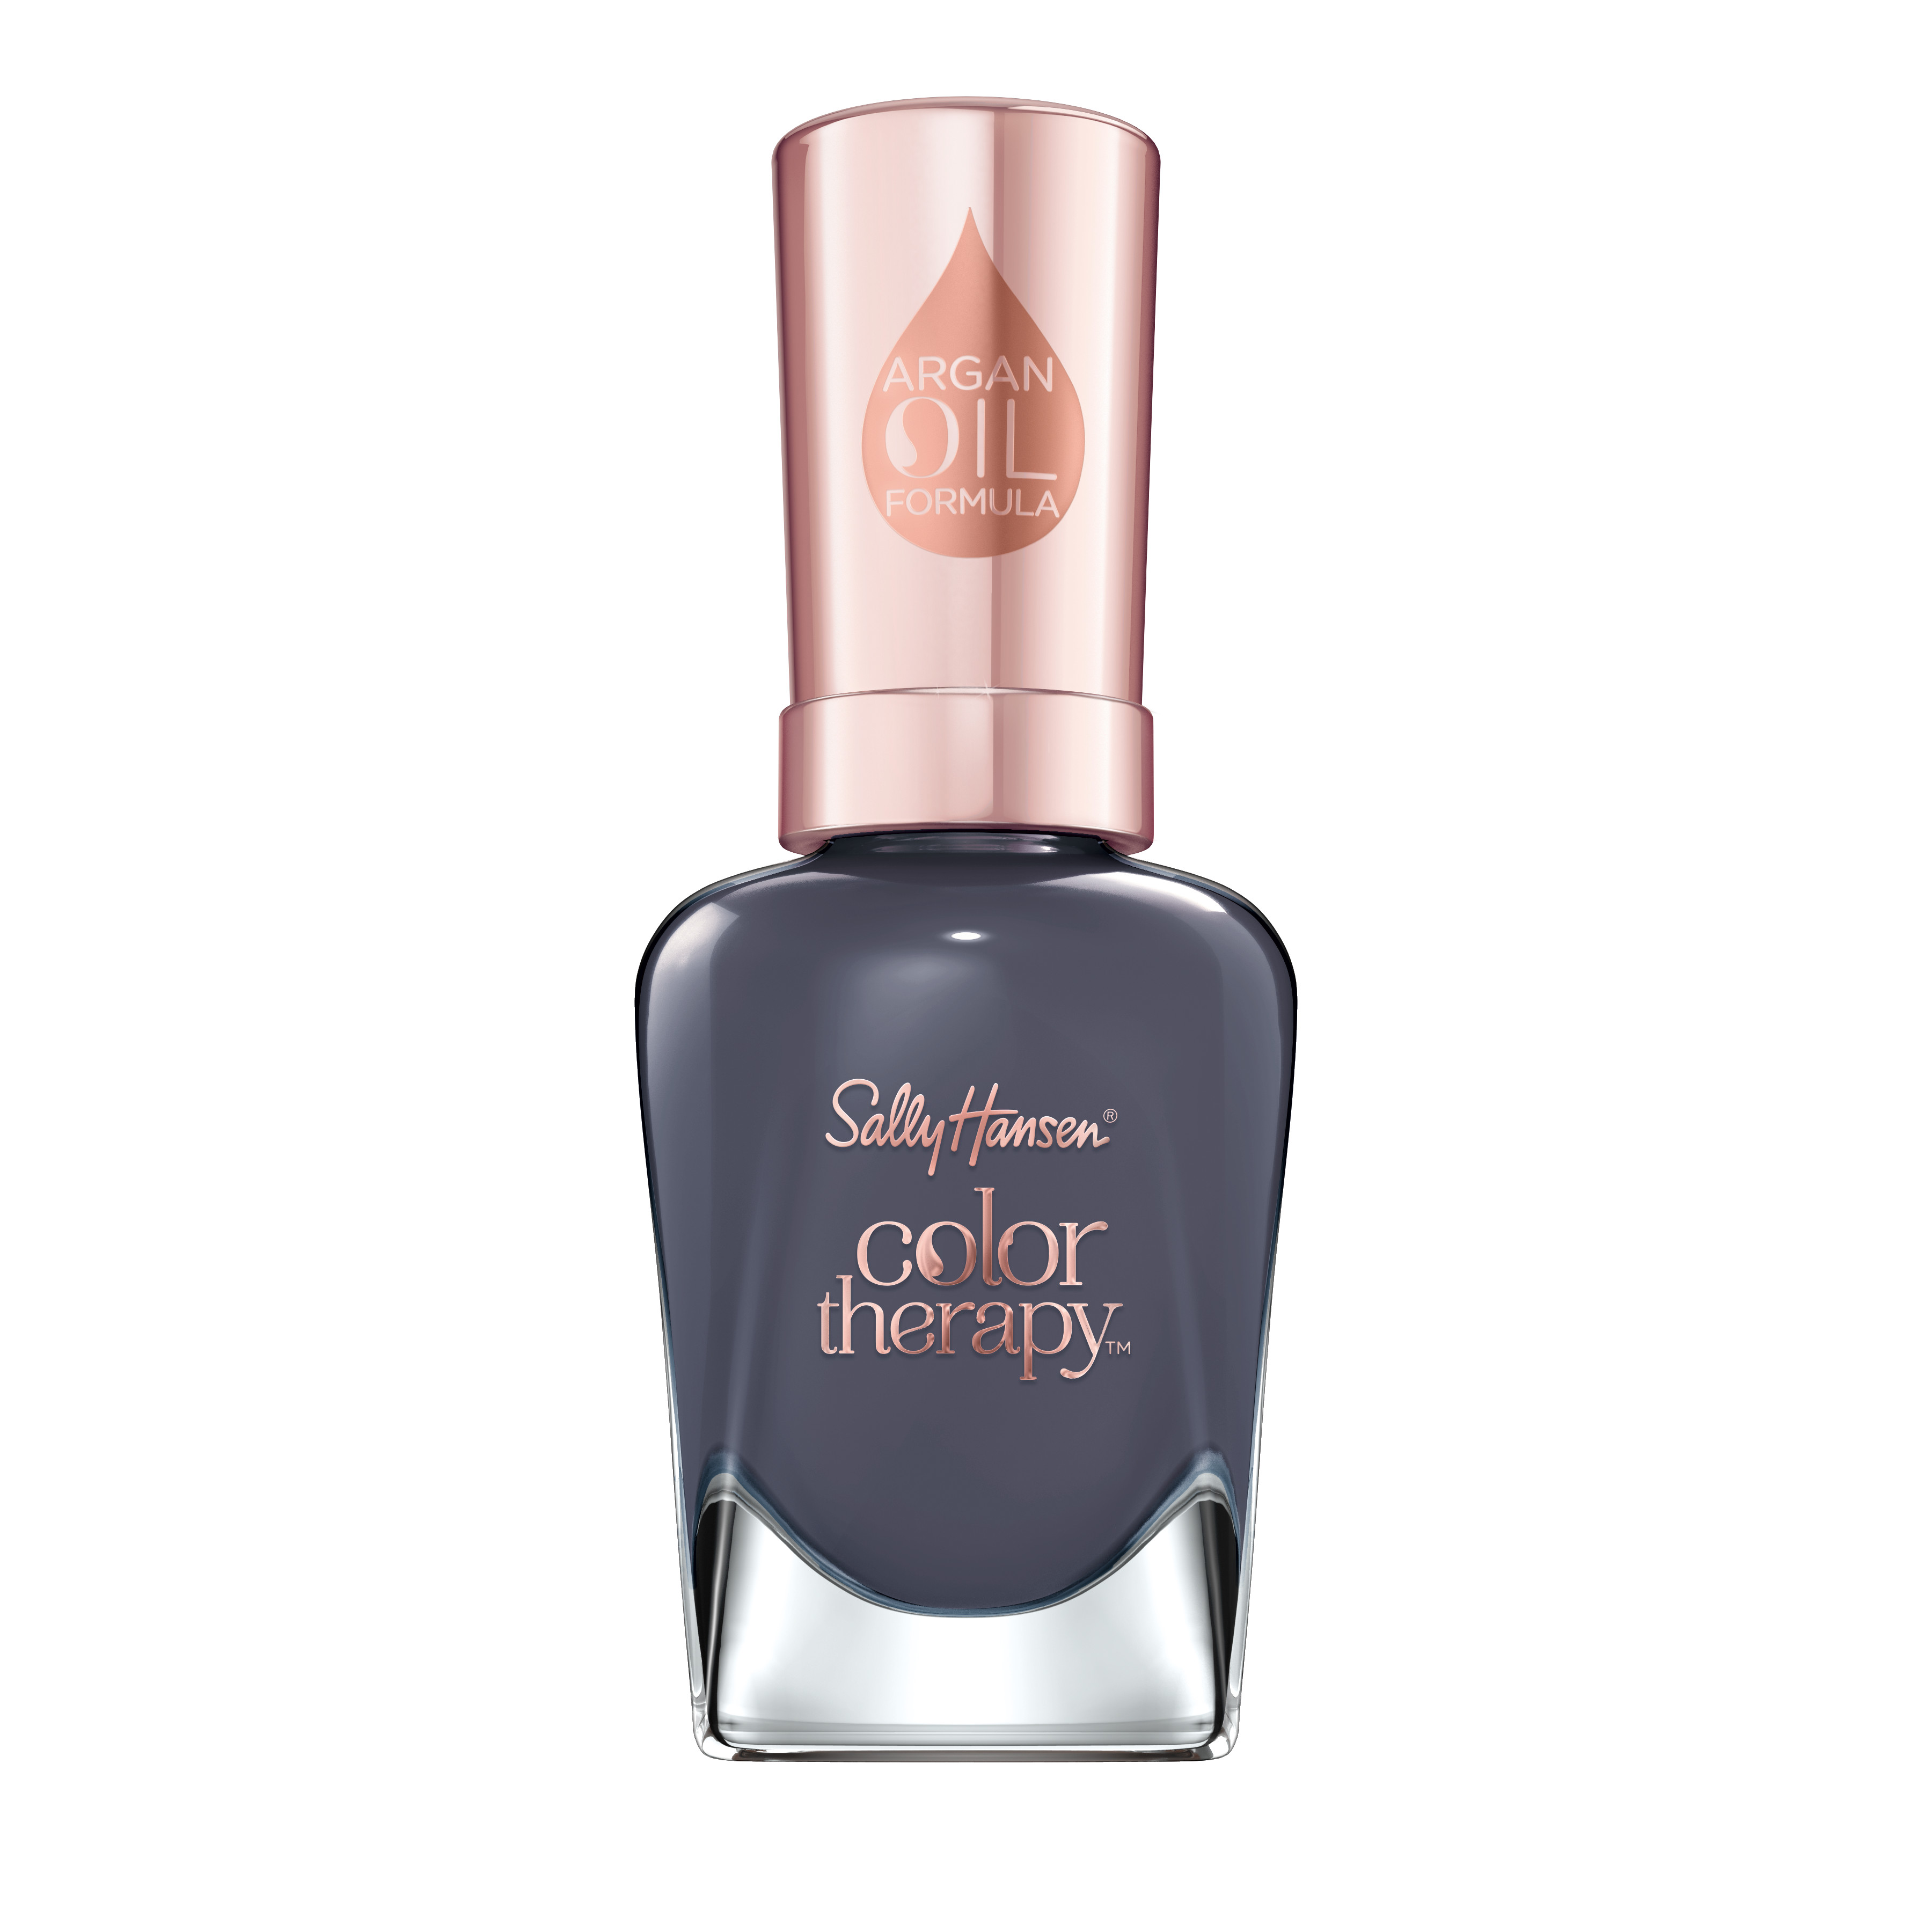 Sally Hansen Color Therapy Nail Color, Oceans Away, 0.5 oz, Color Nail Polish, Nail Polish, Nail Polish Colors, Restorative, Argan Oil Formula, Instantly Moisturizes - image 1 of 13